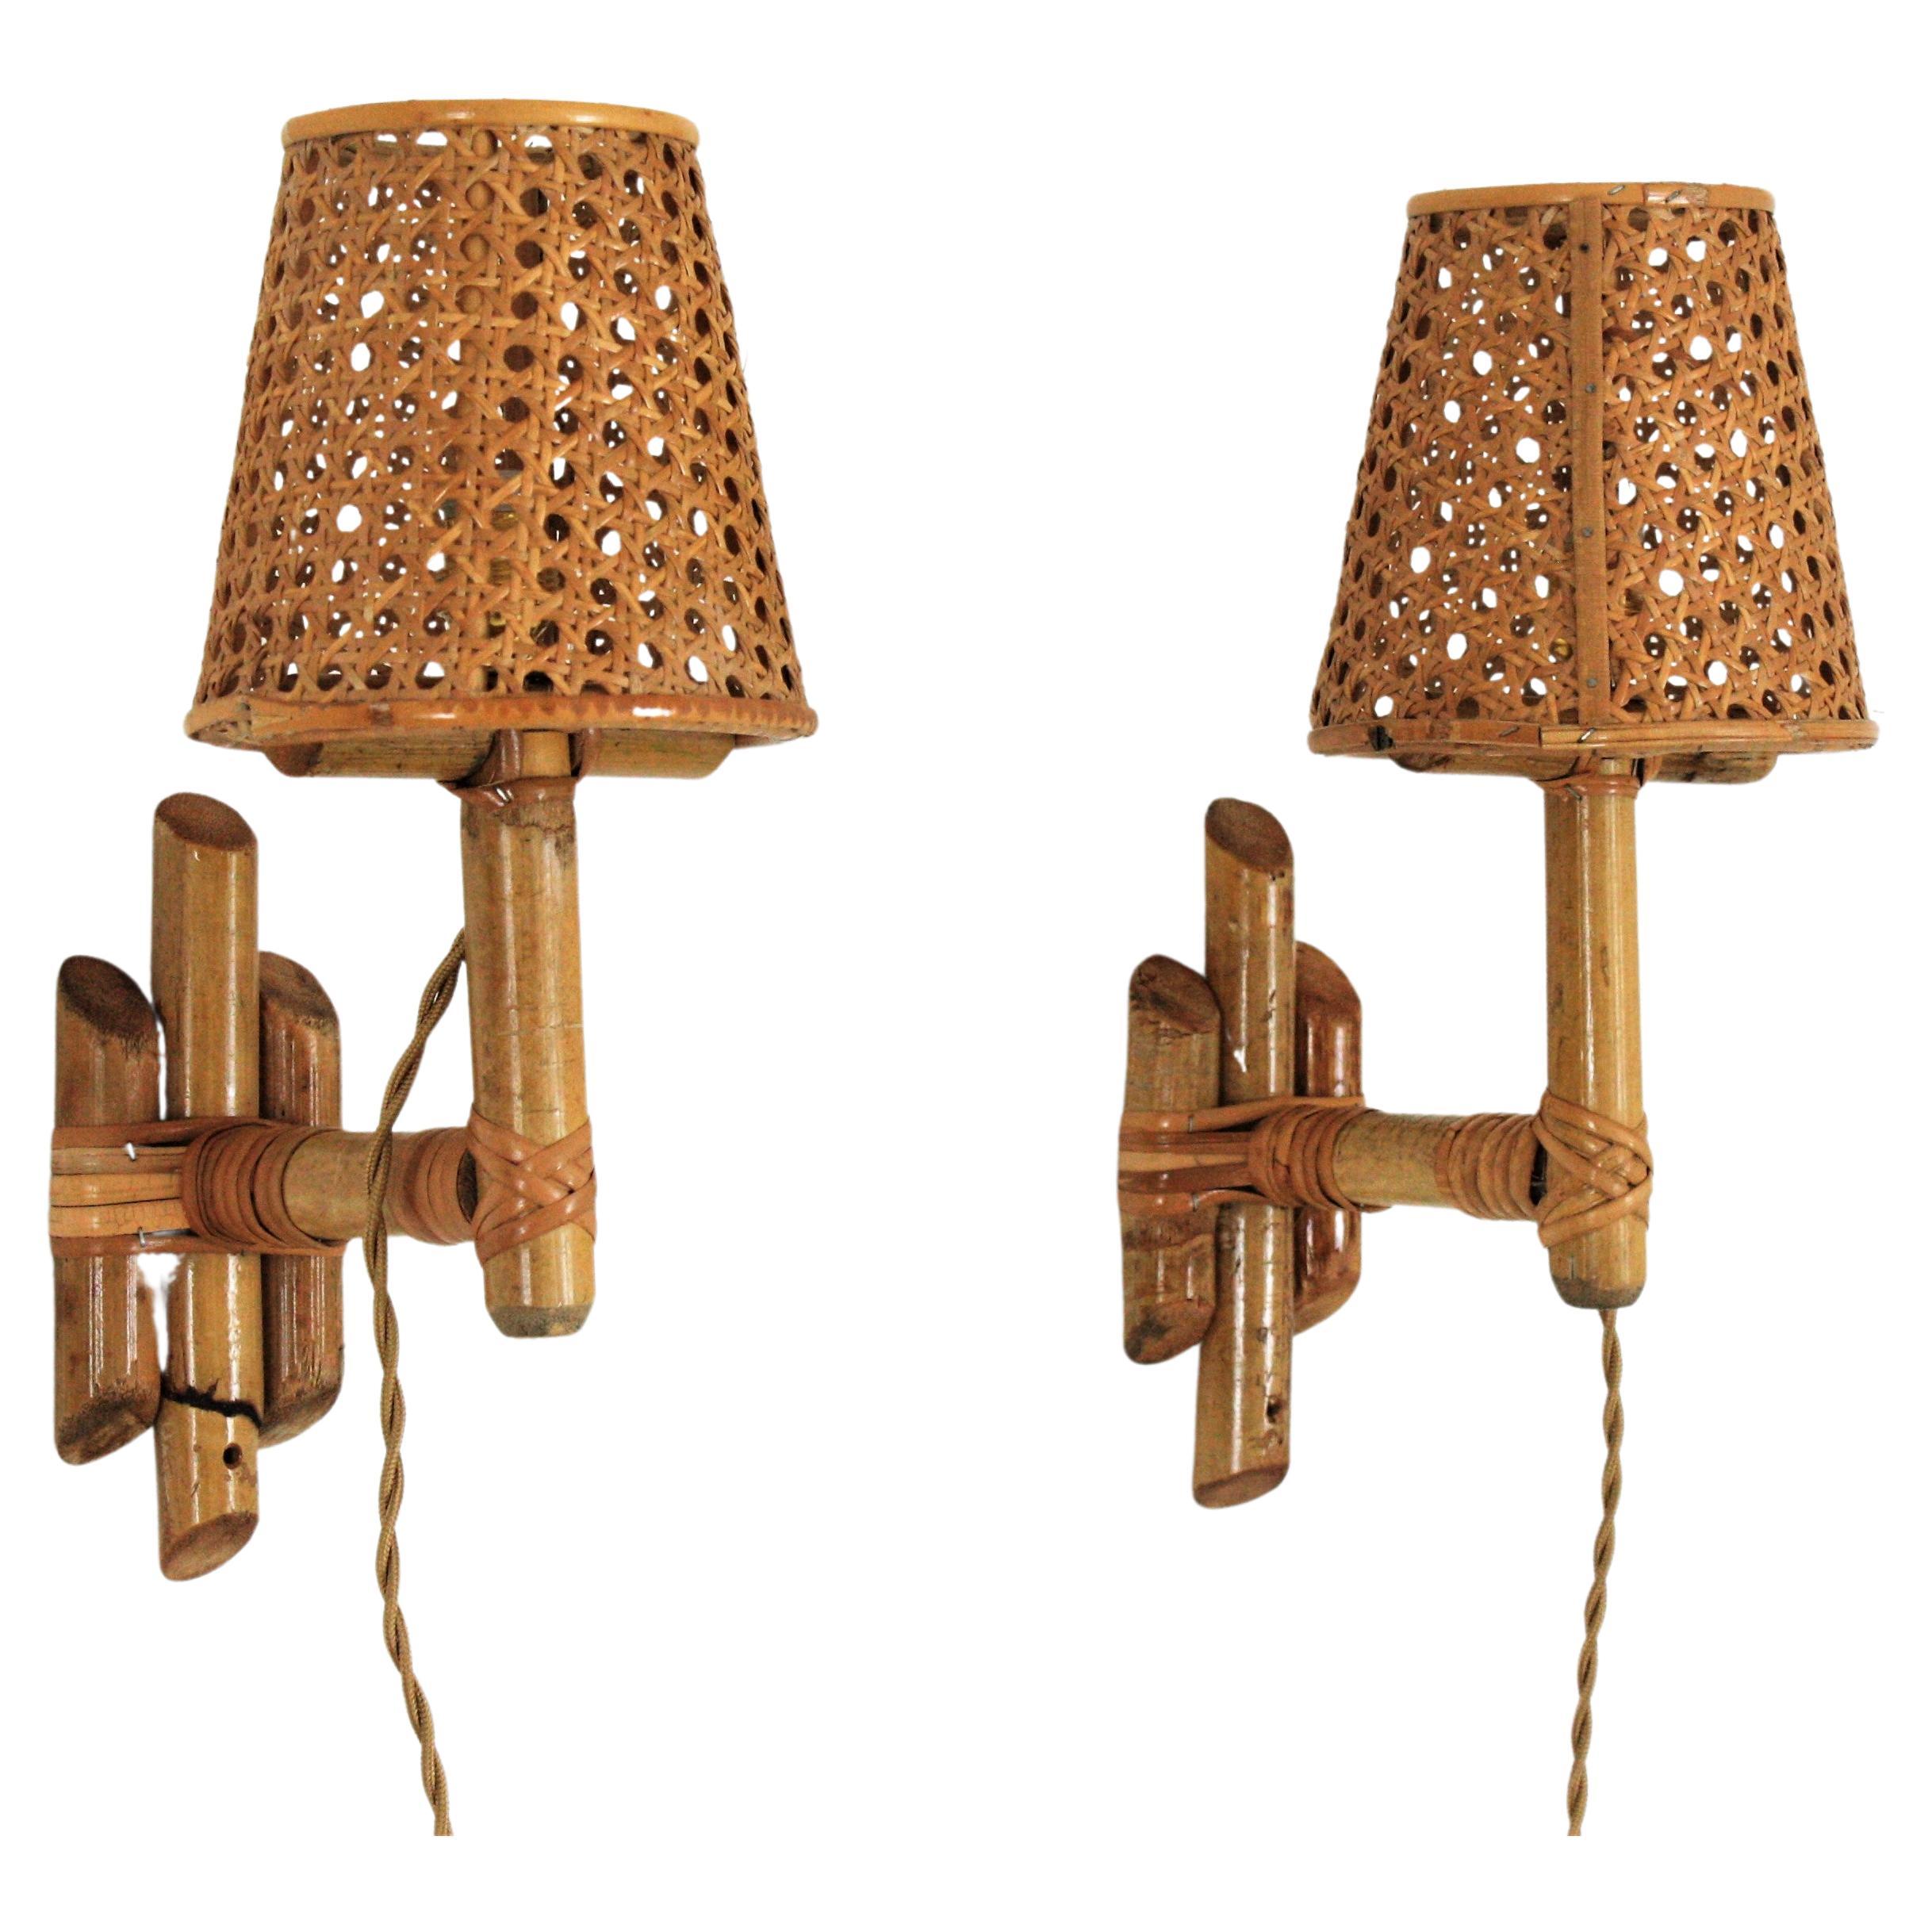 Pair of Italian Modern Woven Wicker Rattan and Bamboo Wall Lights with Shades For Sale